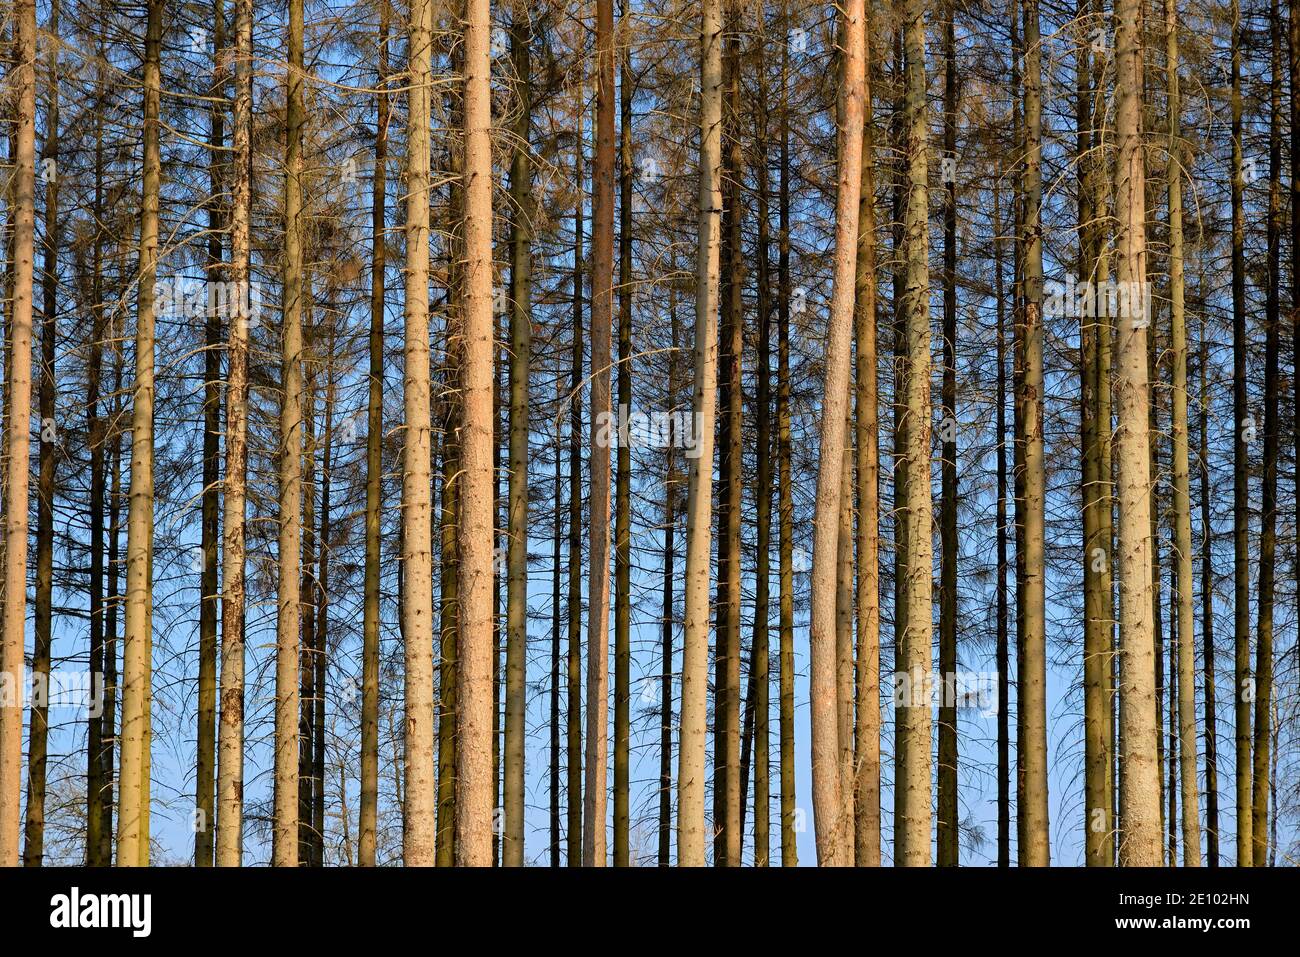 Coniferous forest, dead spruce (Picea abies) due to bark beetle infestation and drought, Arnsberger Wald nature park Park, North Rhine-Westphalia, Ger Stock Photo